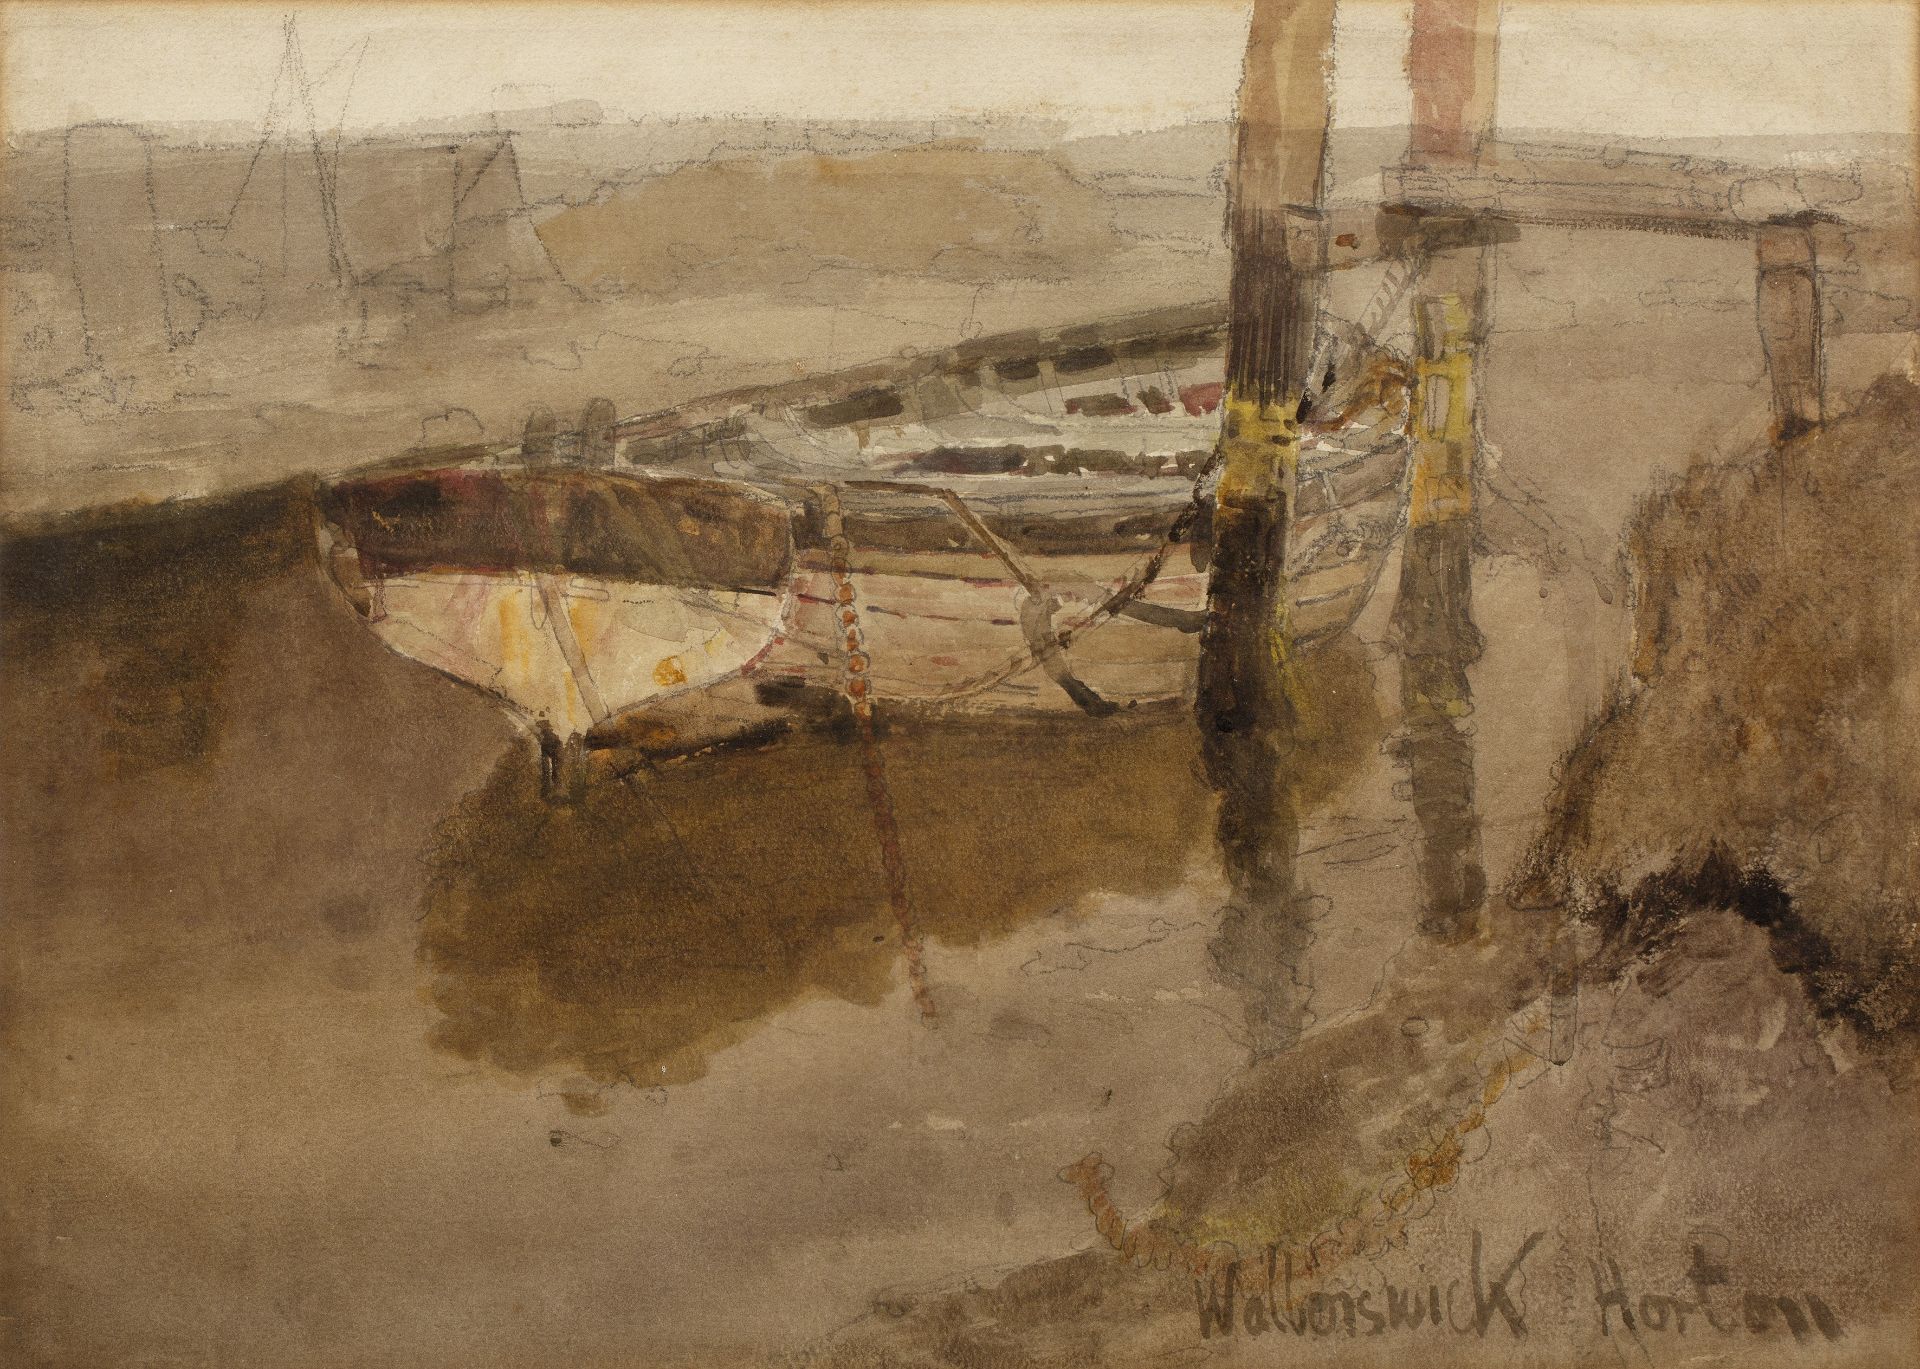 George Edward Horton (1859-1950) 'Walberswick', watercolour, signed lower right, 26cm x 36cm Overall